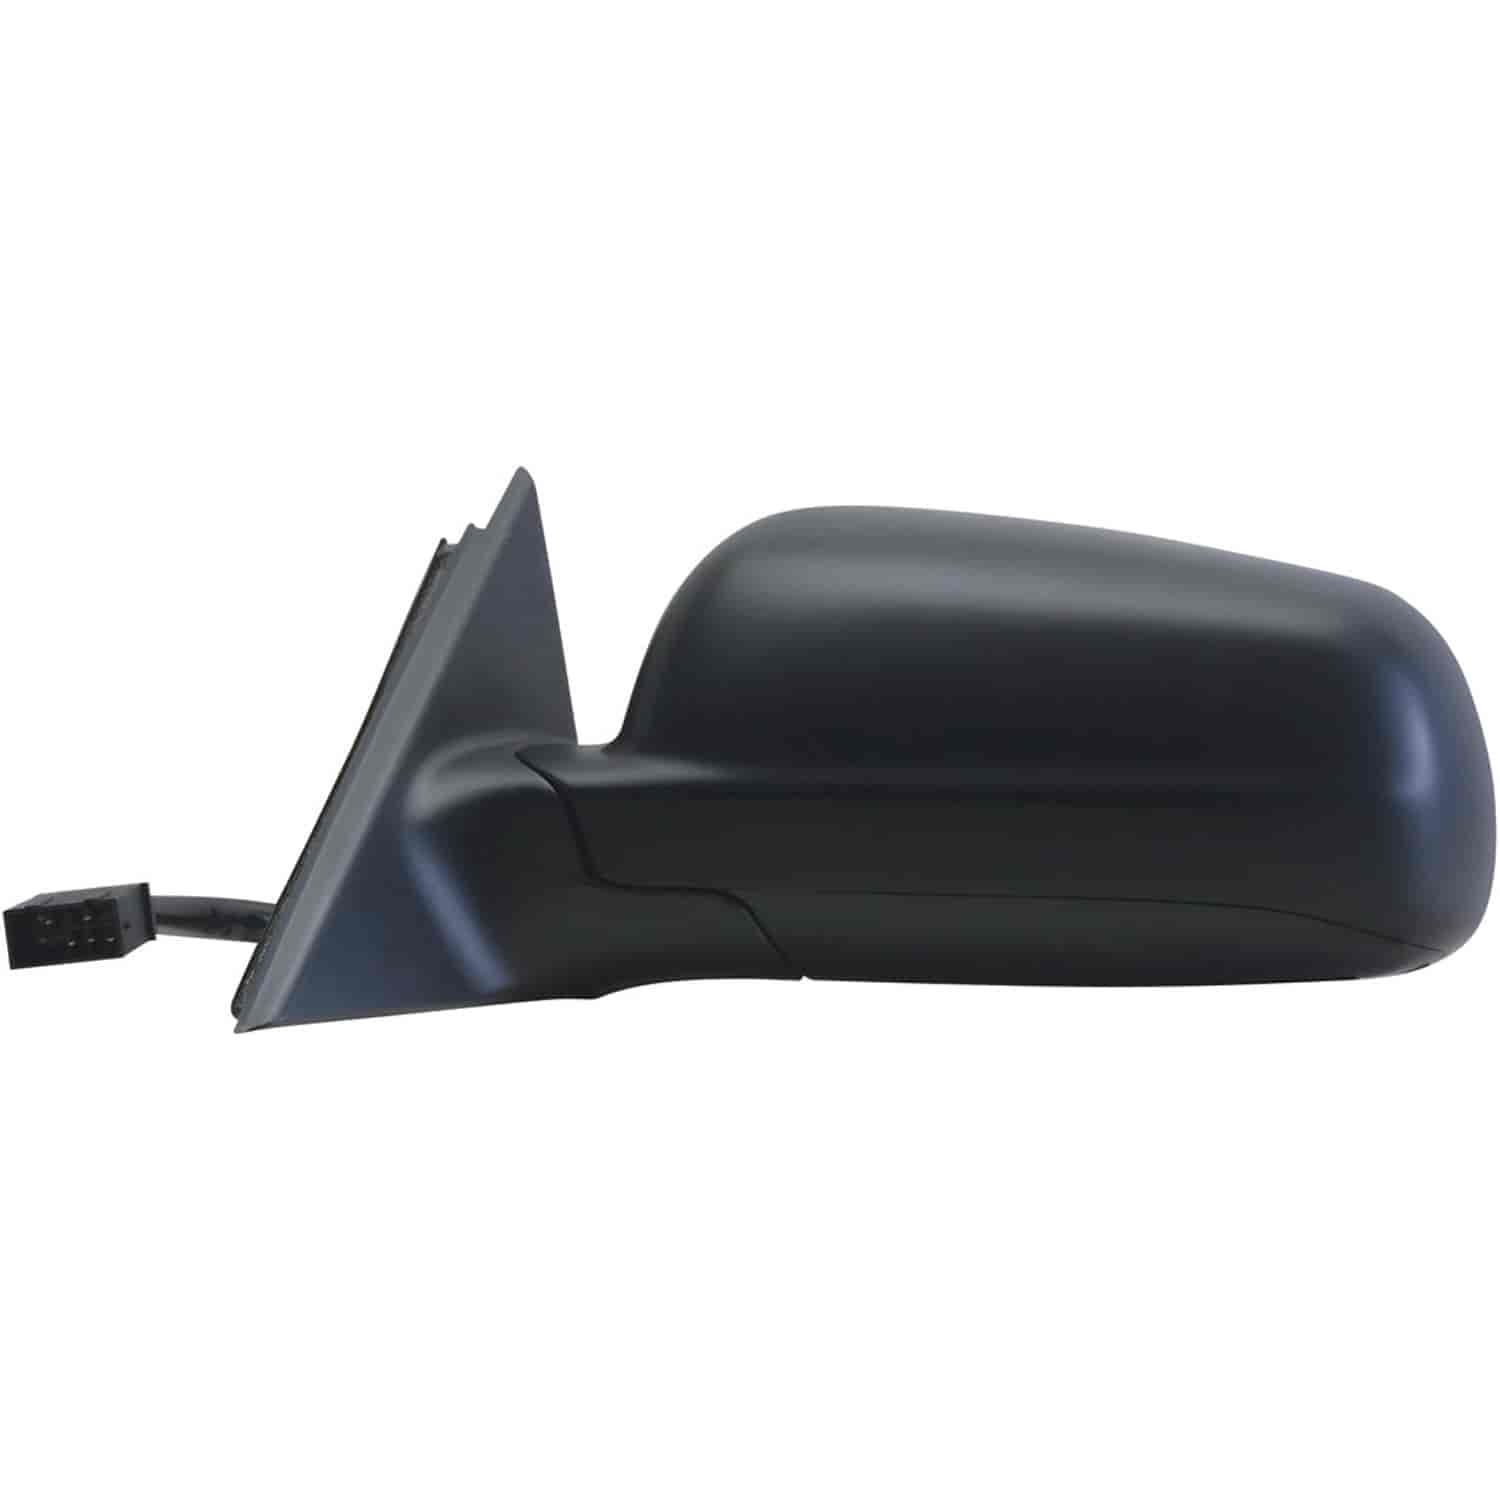 OEM Style Replacement mirror for 01-04 VW Passat